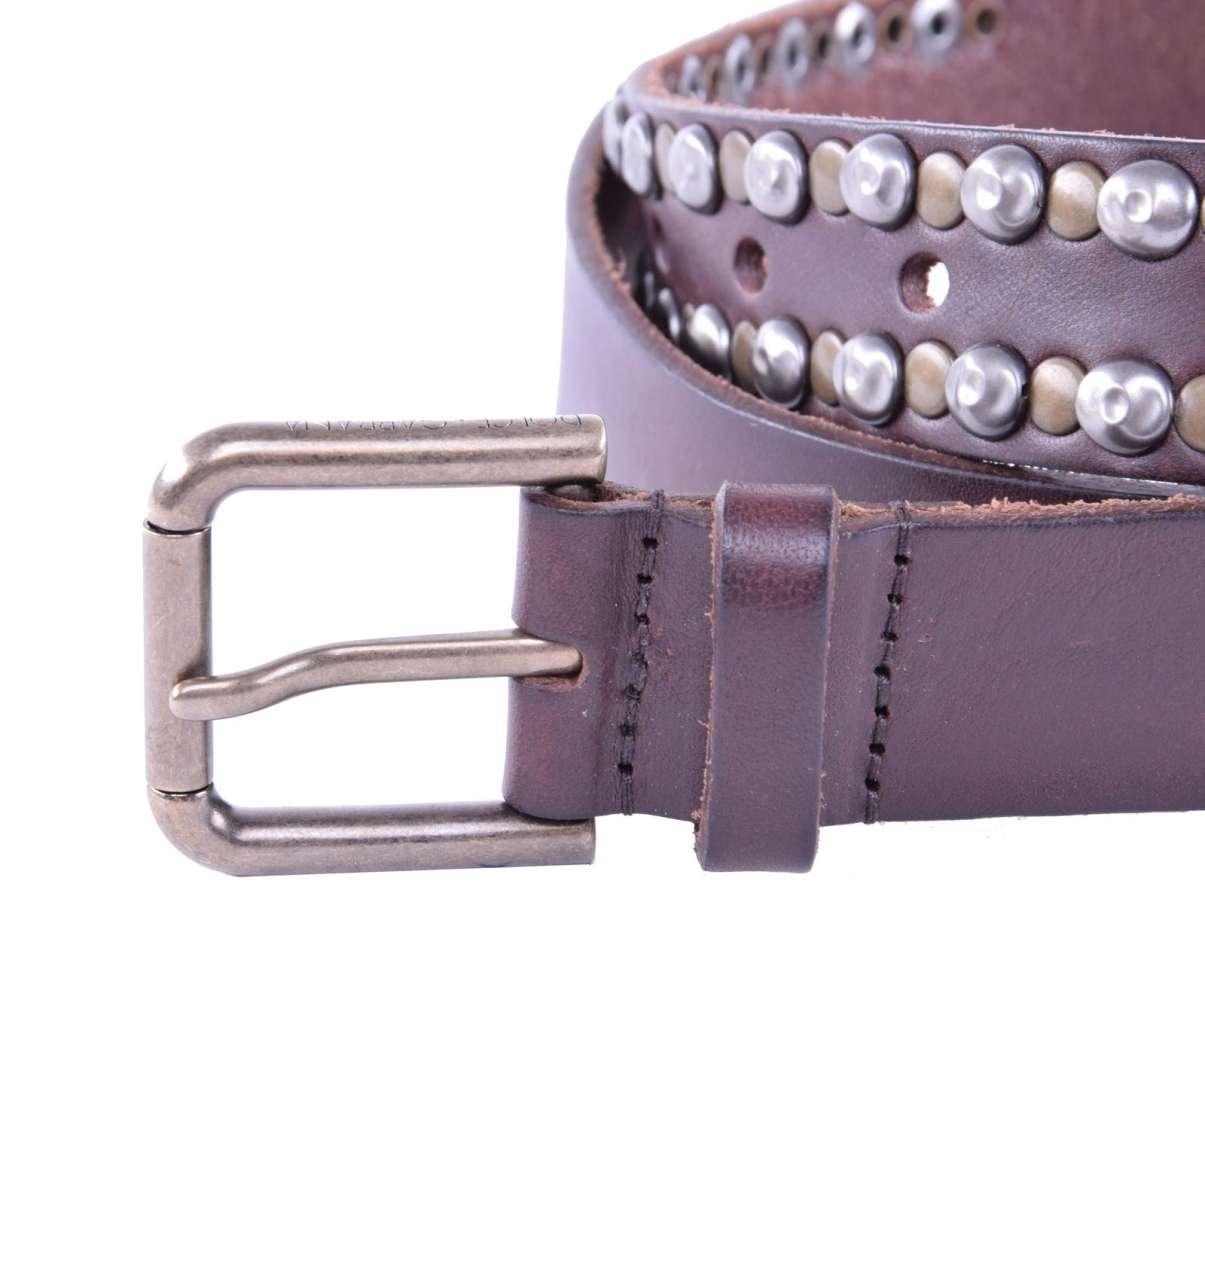 - Belt with studs by DOLCE&GABBANA Black Label - MADE IN ITALY - New with Dustbag - Model: BC3584-A1822 - Material: 100% Calf Leather - Width: 2,8 cm - Color: Dark Brown - Measurements (appr. values) - Buckle to the first hole / Buckle to the last